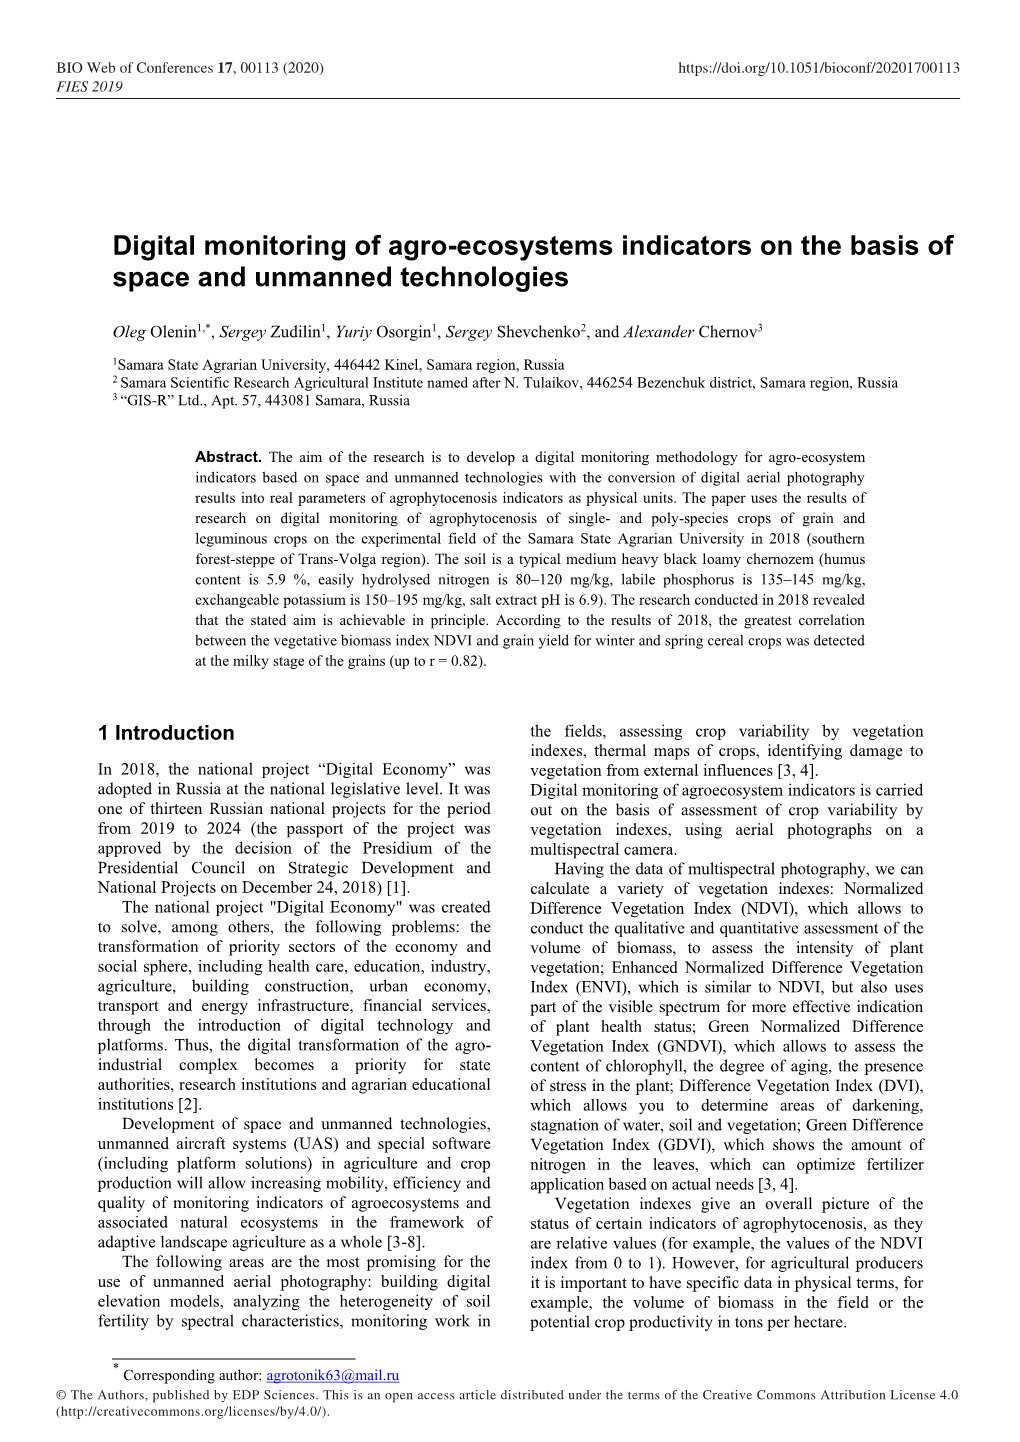 Digital Monitoring of Agro-Ecosystems Indicators on the Basis of Space and Unmanned Technologies